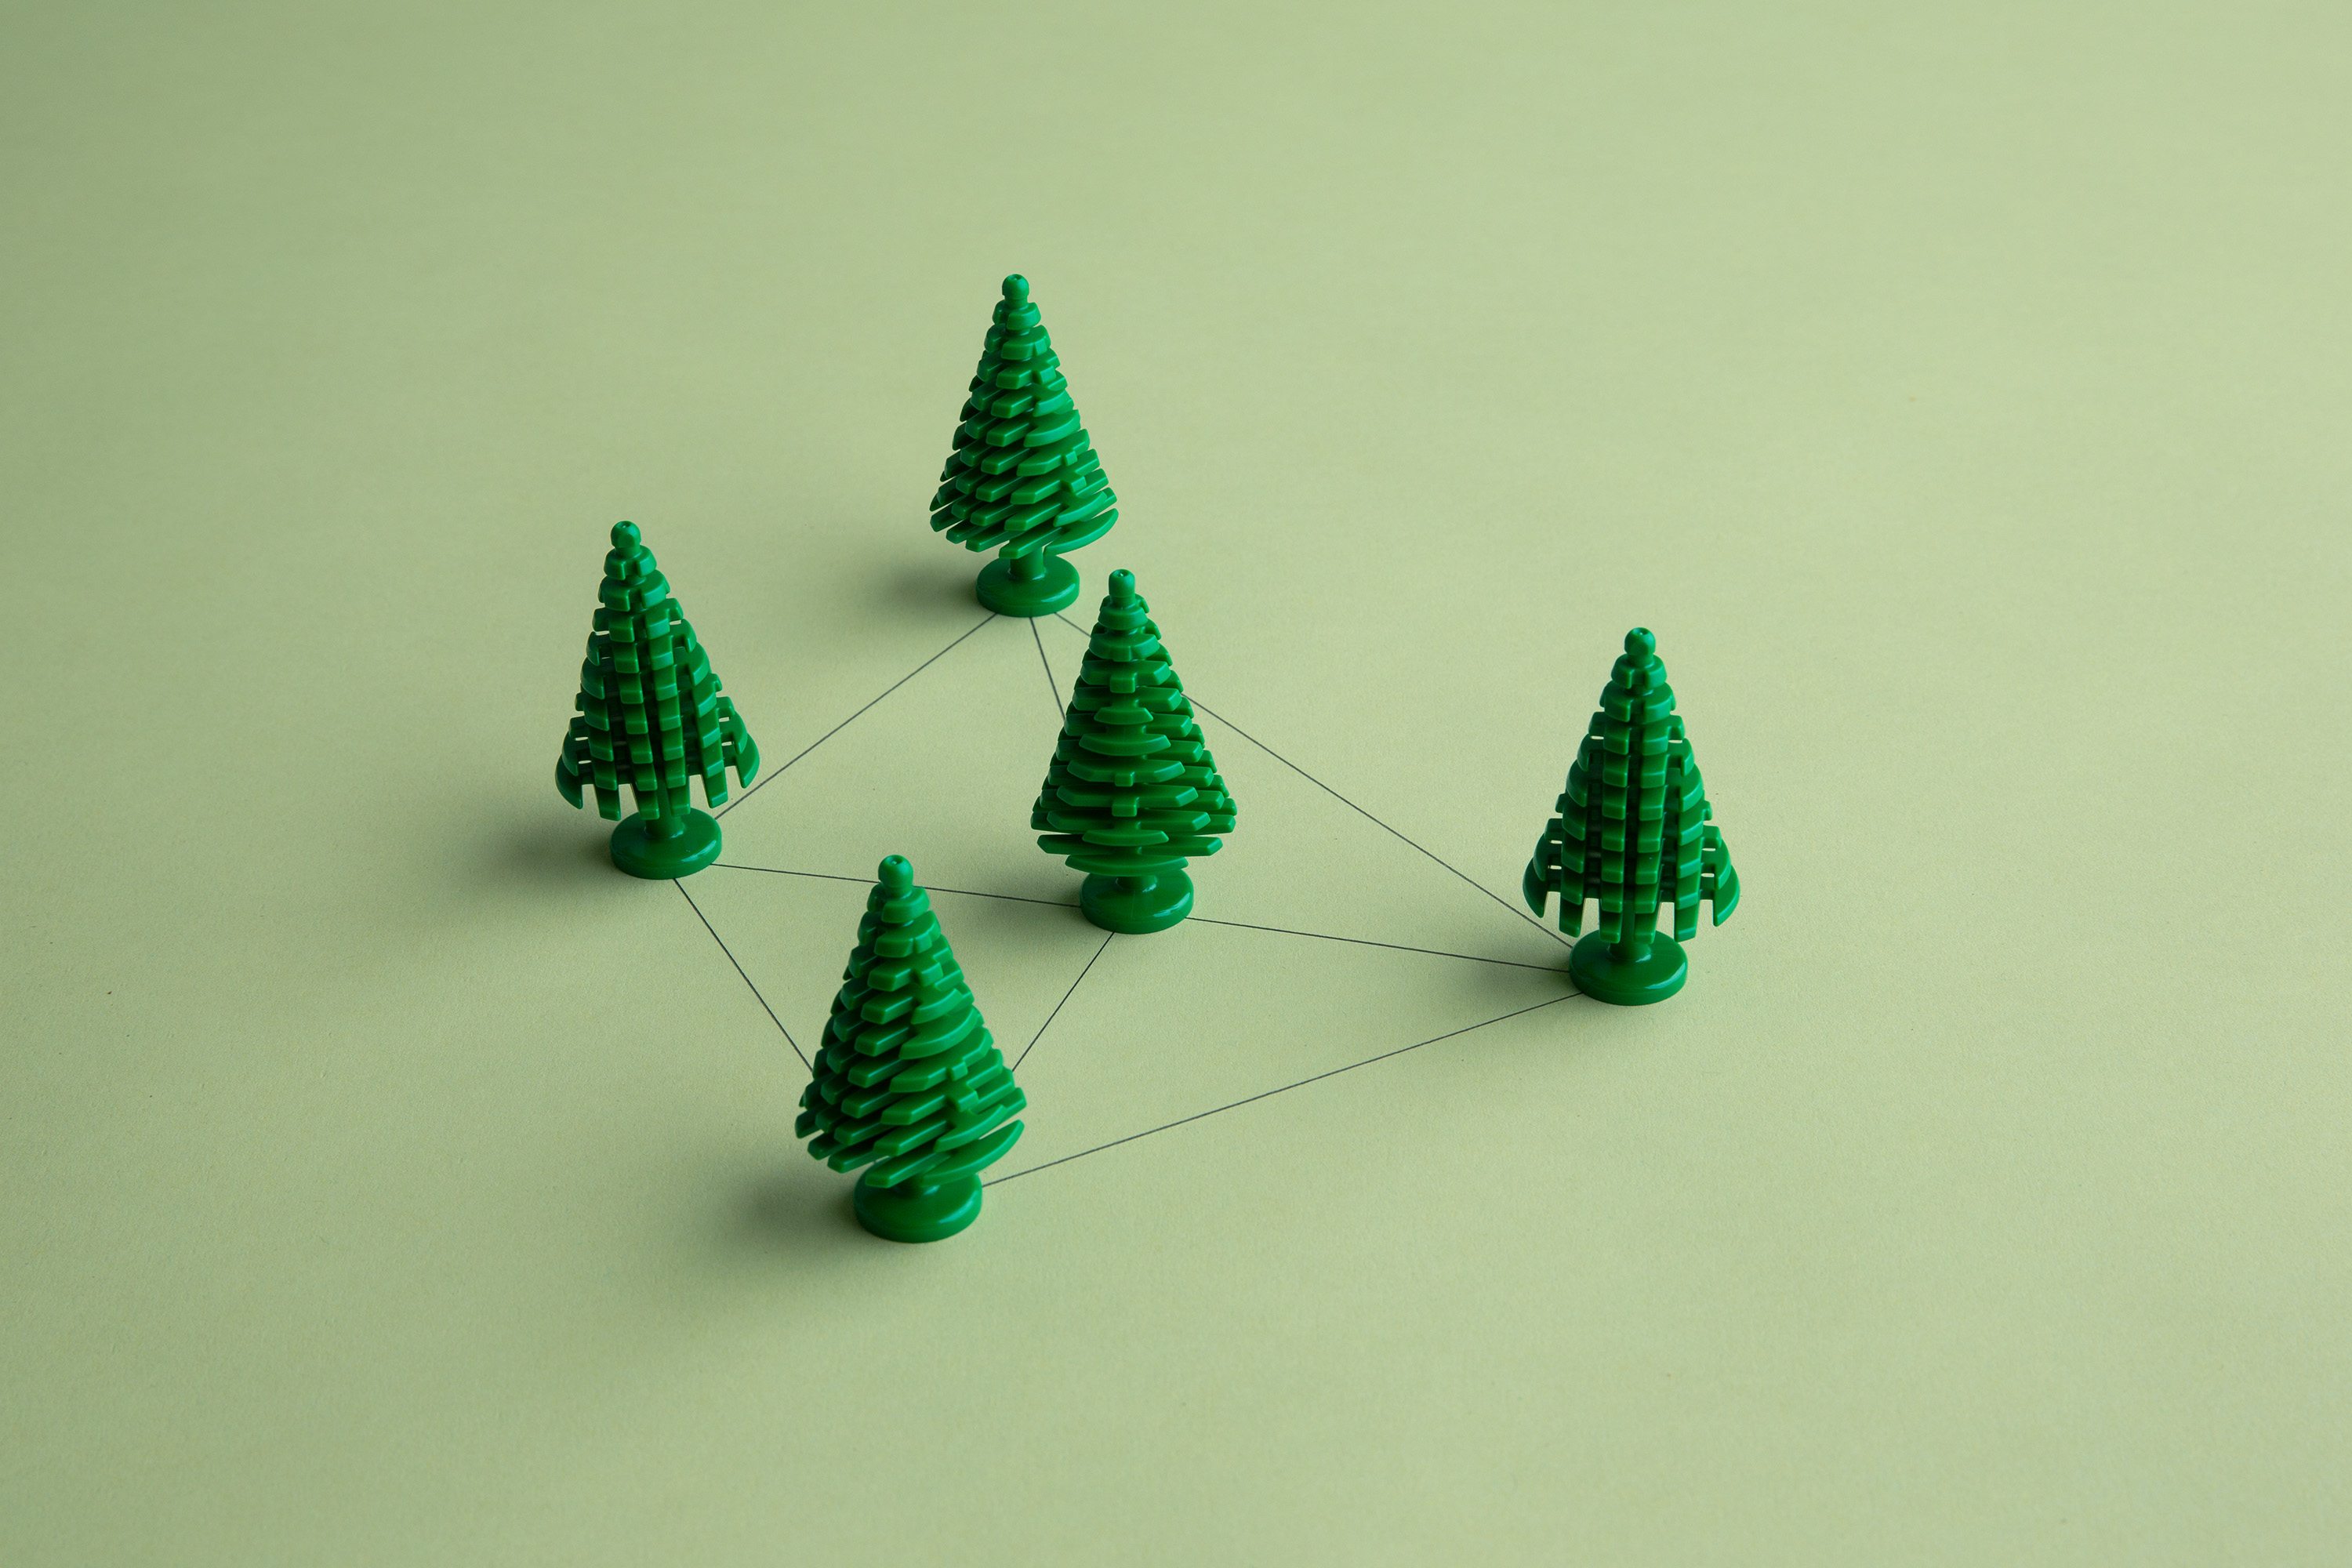 Small toy trees